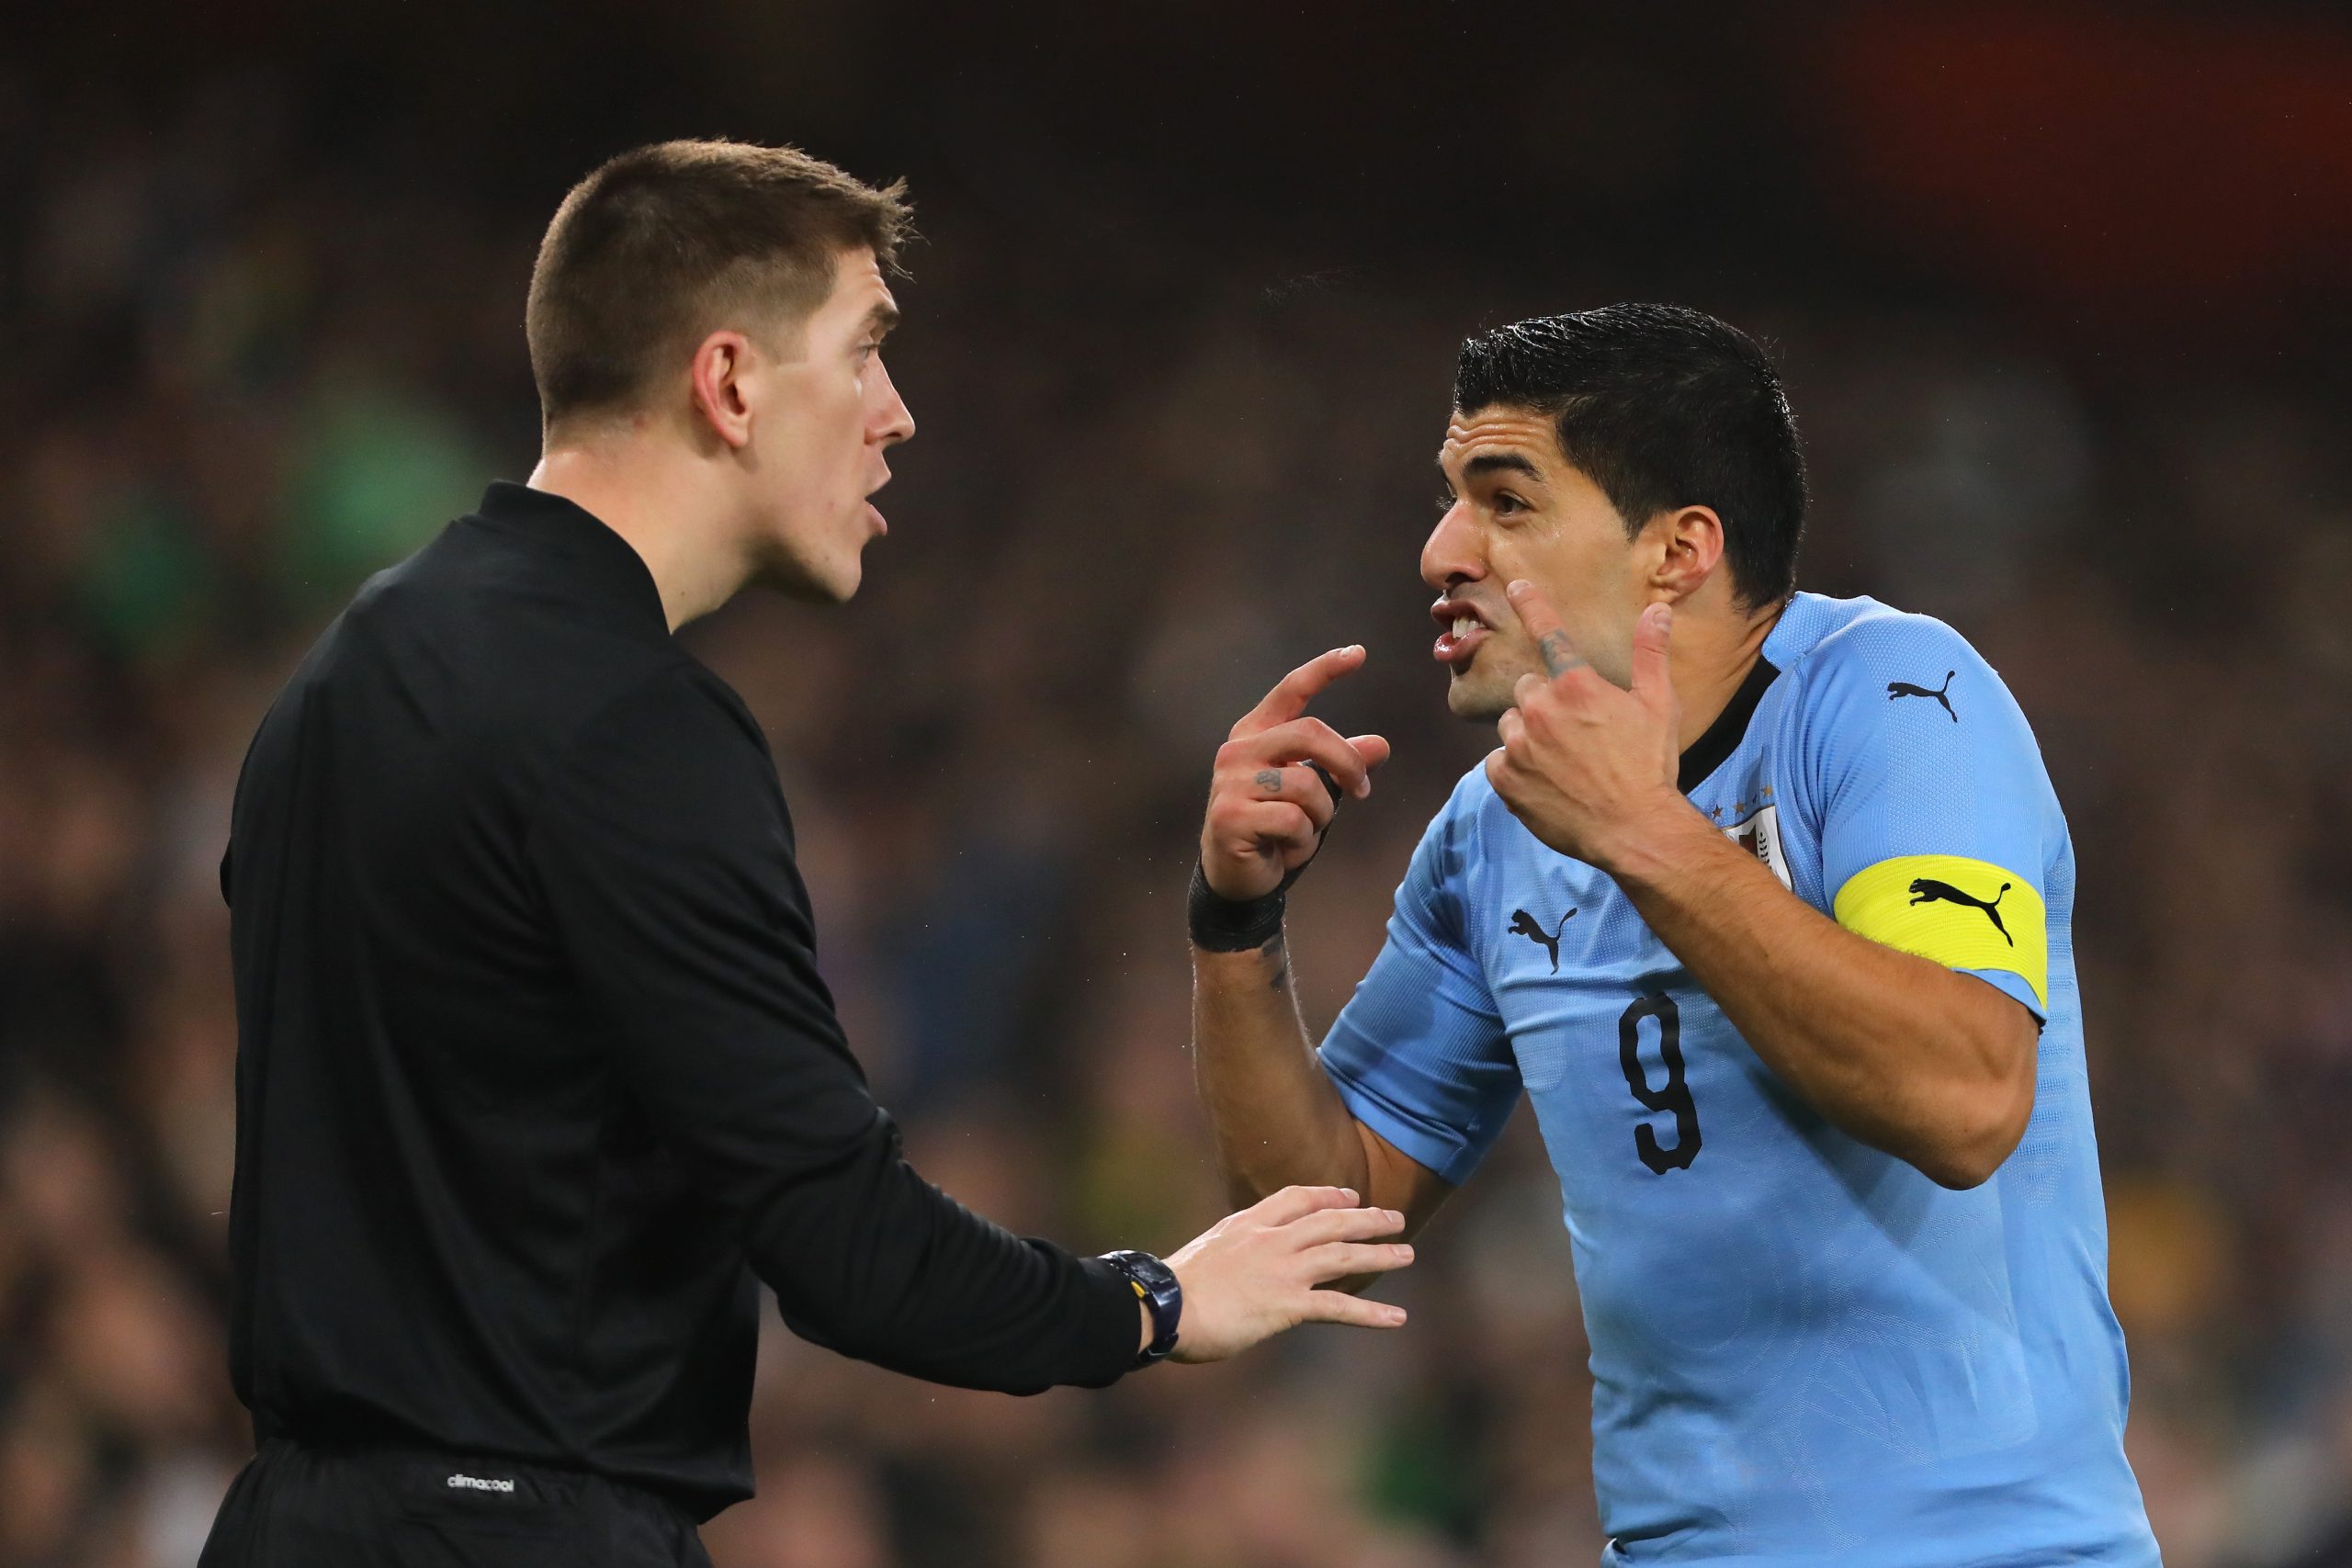 Luis Suarez arguing with the referee during a Uruguay match